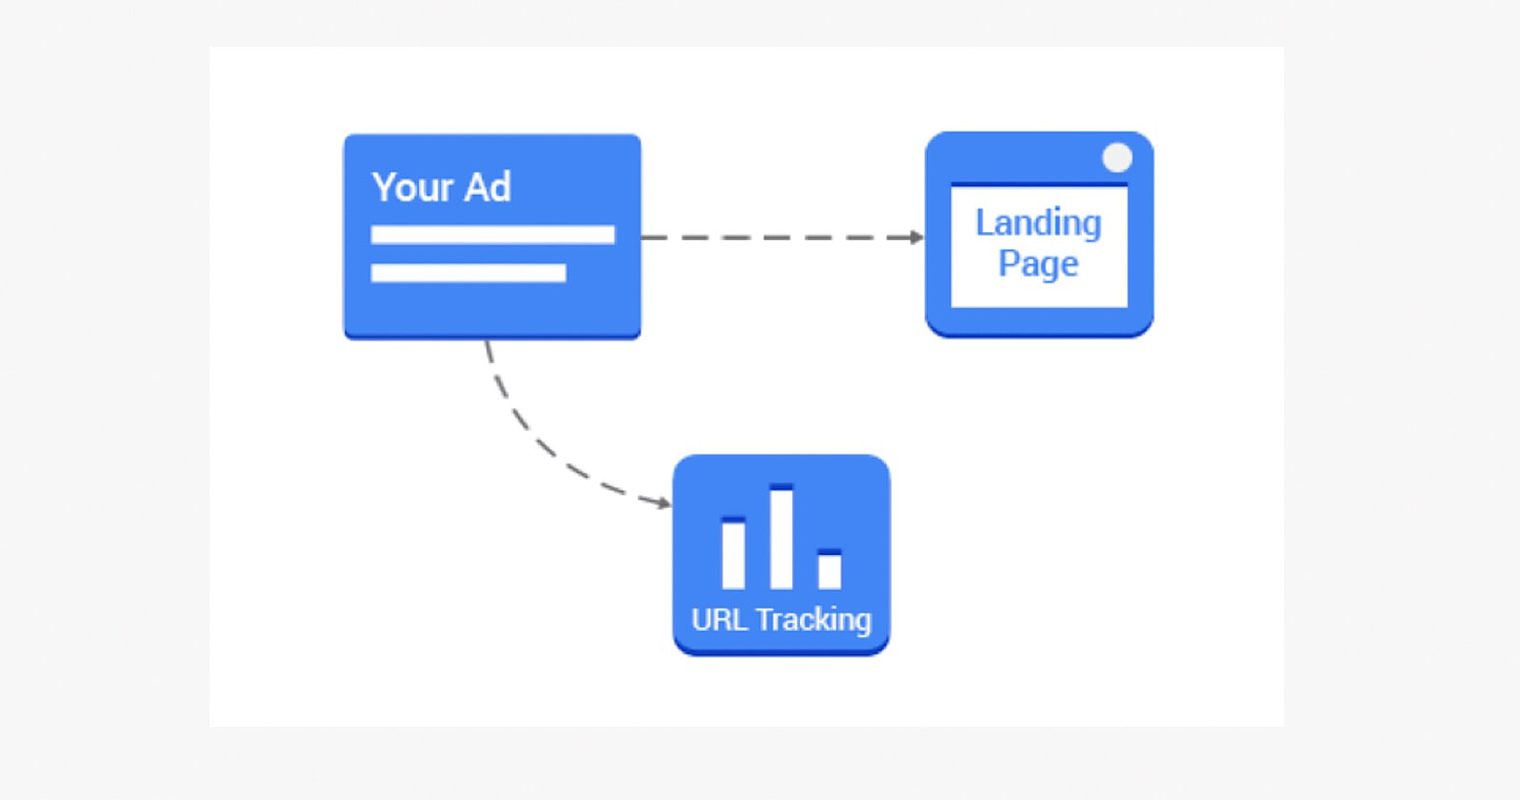 Google AdWords Requires All Accounts to Use Parallel Tracking, As of October 2018